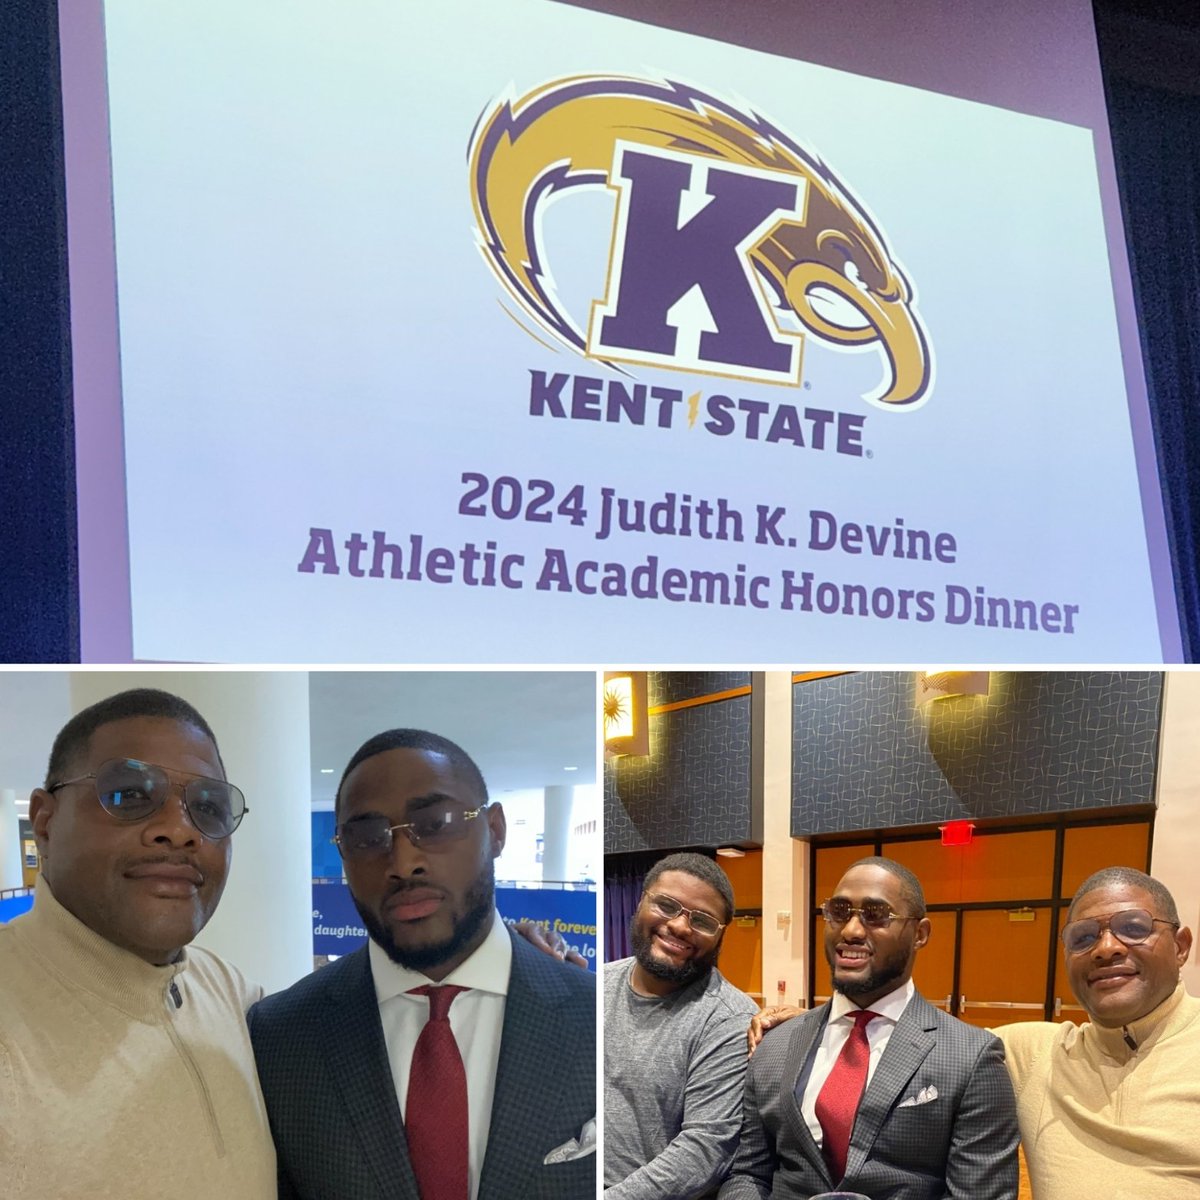 So proud of his accomplishments on and off the field!! Graduated college with a Business degree and a 3.71 cumulative gpa!!😍💪🏾
#DeansList👨🏾‍🎓
#HonorsDinner🏆
#ScholarAthlete📚🏈
#NaimTheDream🐐🦍 
#KentStateUniversityAlum
#CharlesCountyEliteOG💙💛